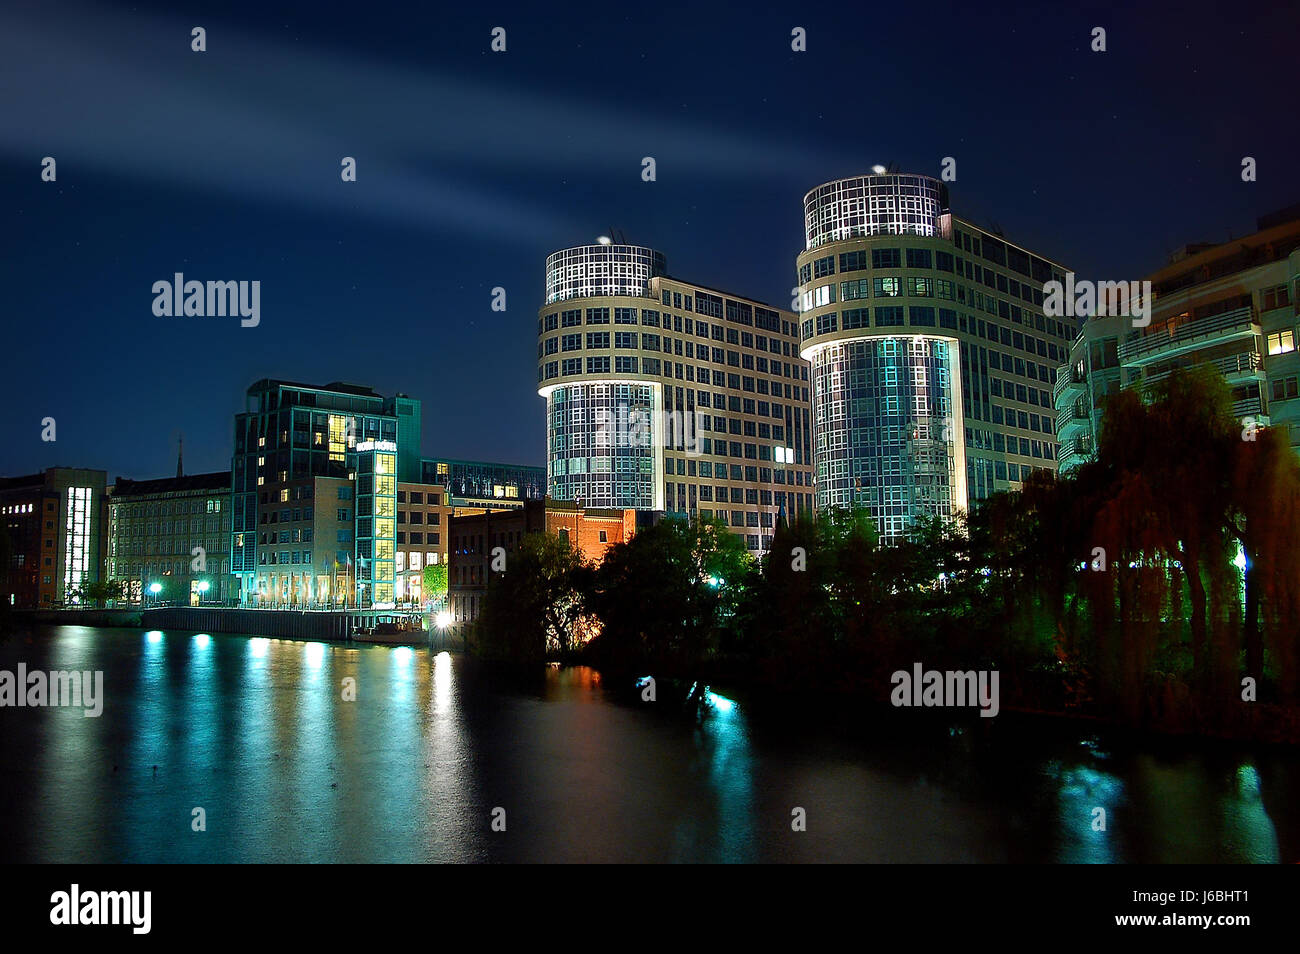 berlin capital style of construction architecture architectural style night Stock Photo